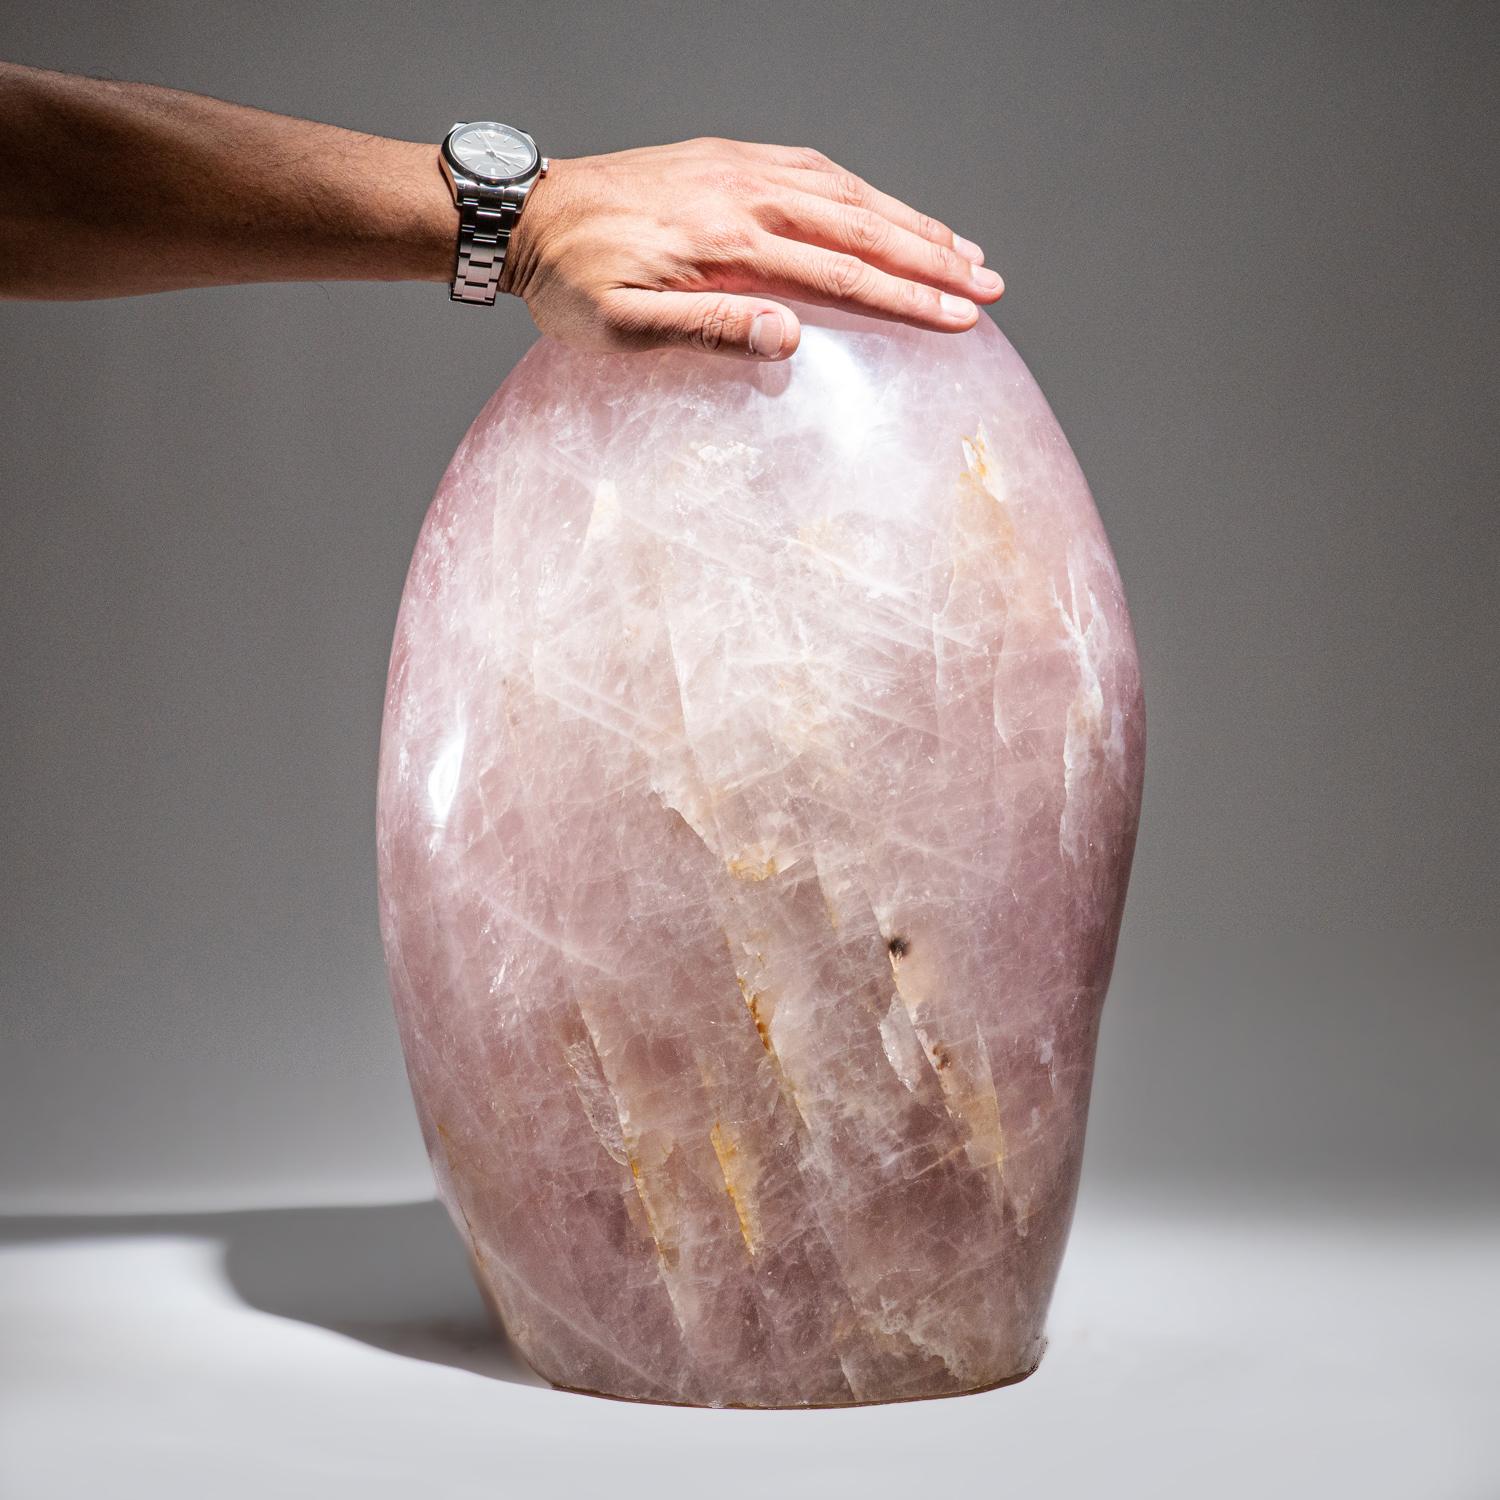 This massive, 102 pound, hand-polished, AAA-quality Rose Quartz freeform from Madagascar is incredibly crafted from one solid piece of Rose Quartz. This beautiful freeform is the focal point in any room. Rose Quartz is the stone of unconditional